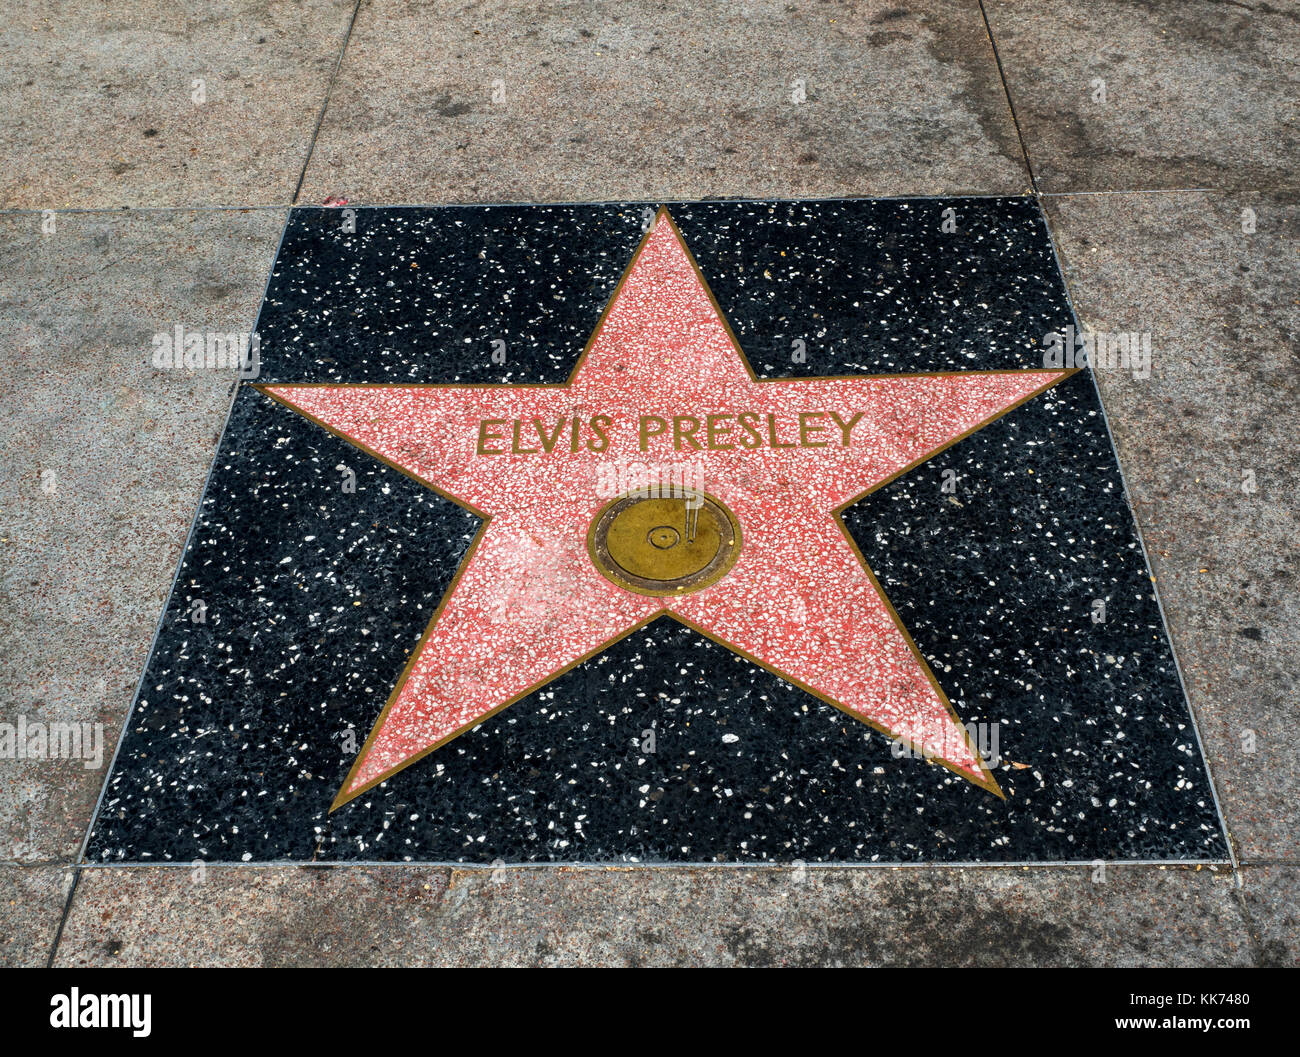 Elvis Presley's Star, Hollywood Walk of Fame - August 11th, 2017 - Hollywood Boulevard, Los Angeles, California, CA, USA Stock Photo